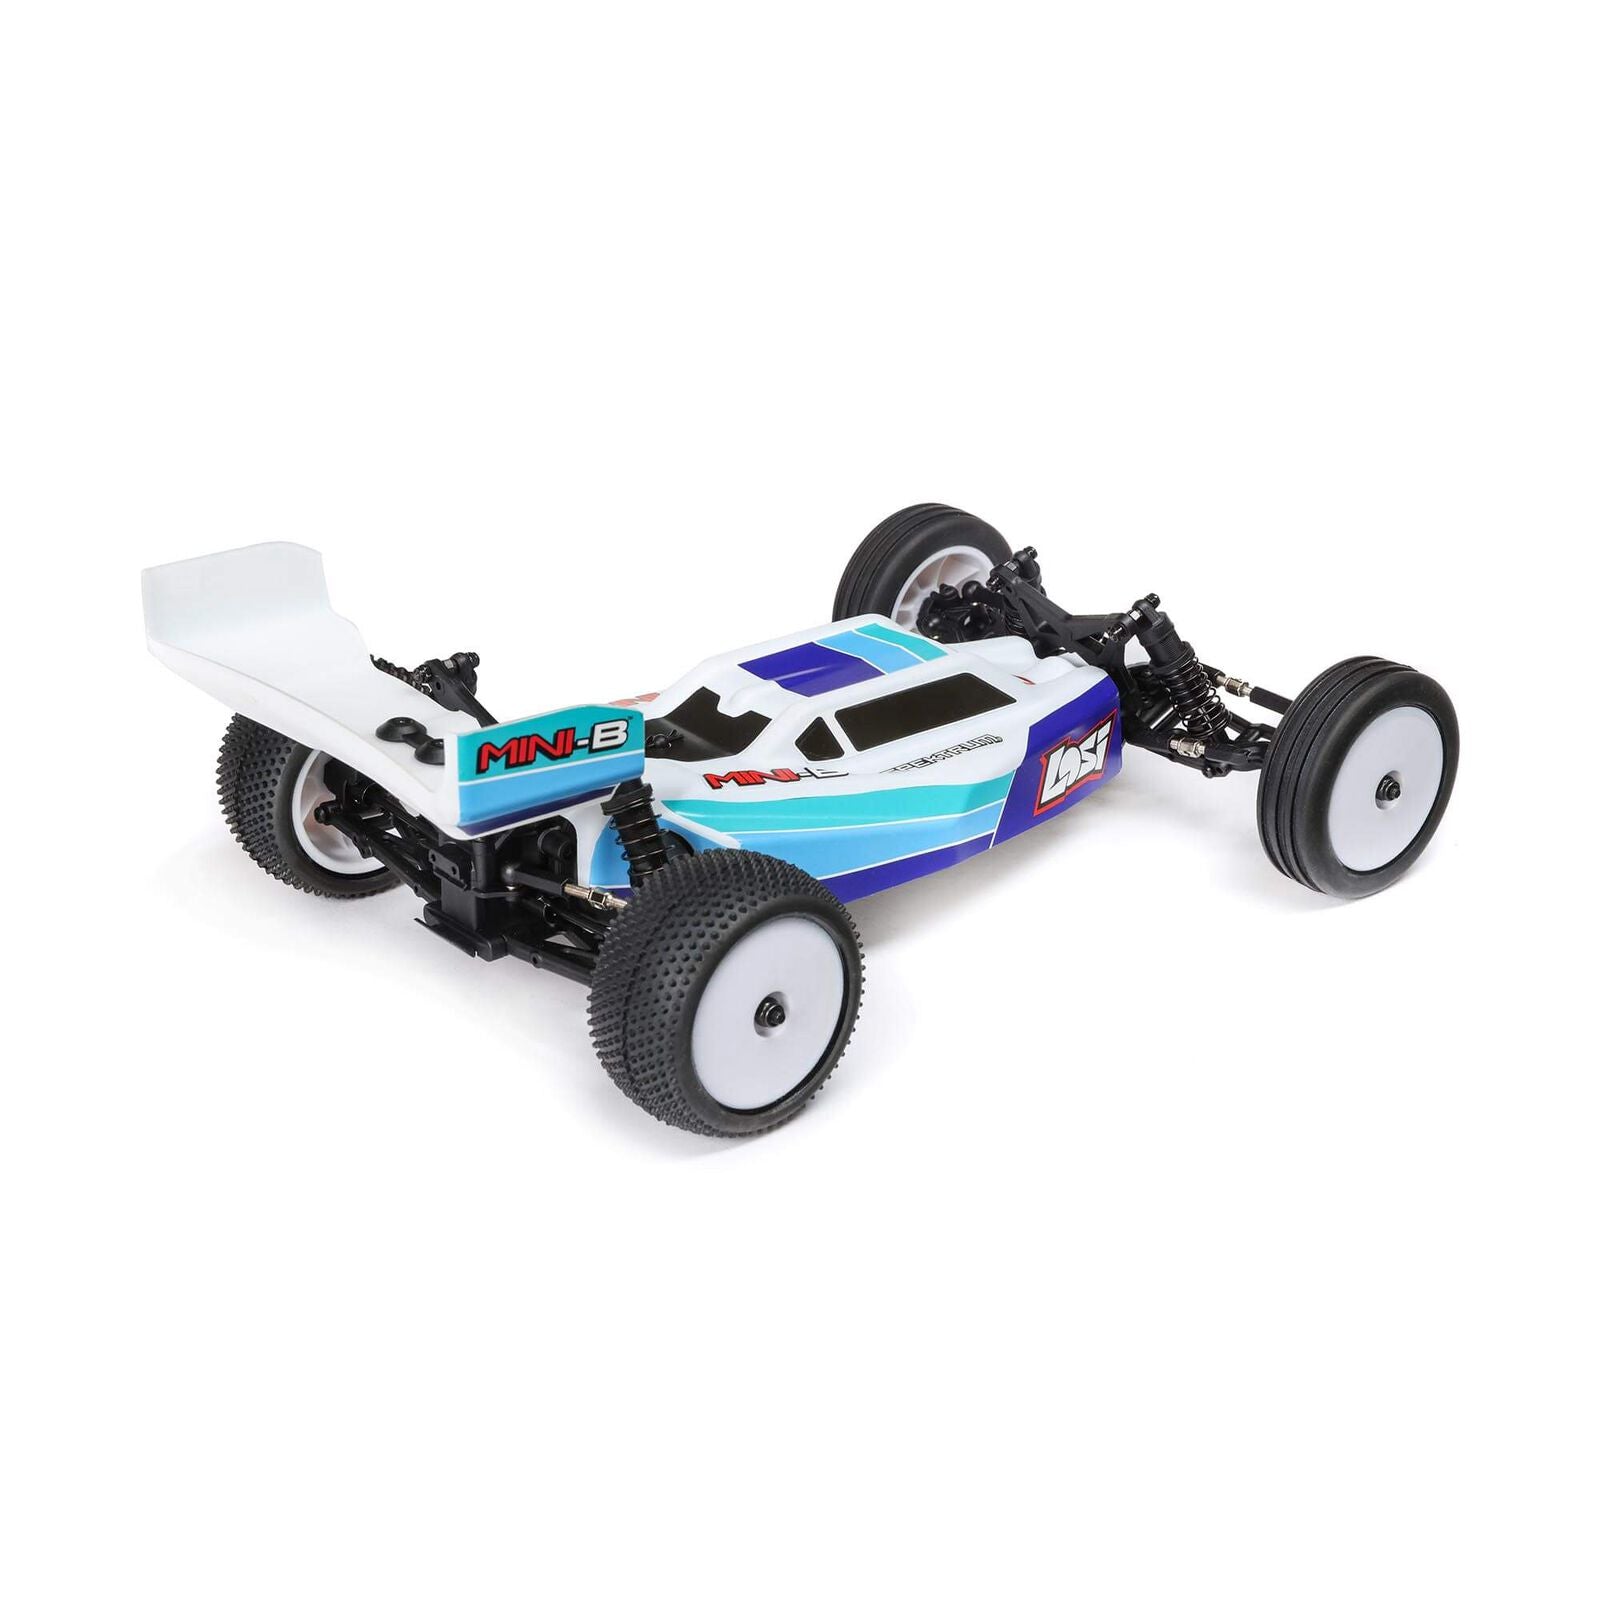 LOS01024T2	 1/16 Mini-B 2WD Buggy Brushless RTR, Blue